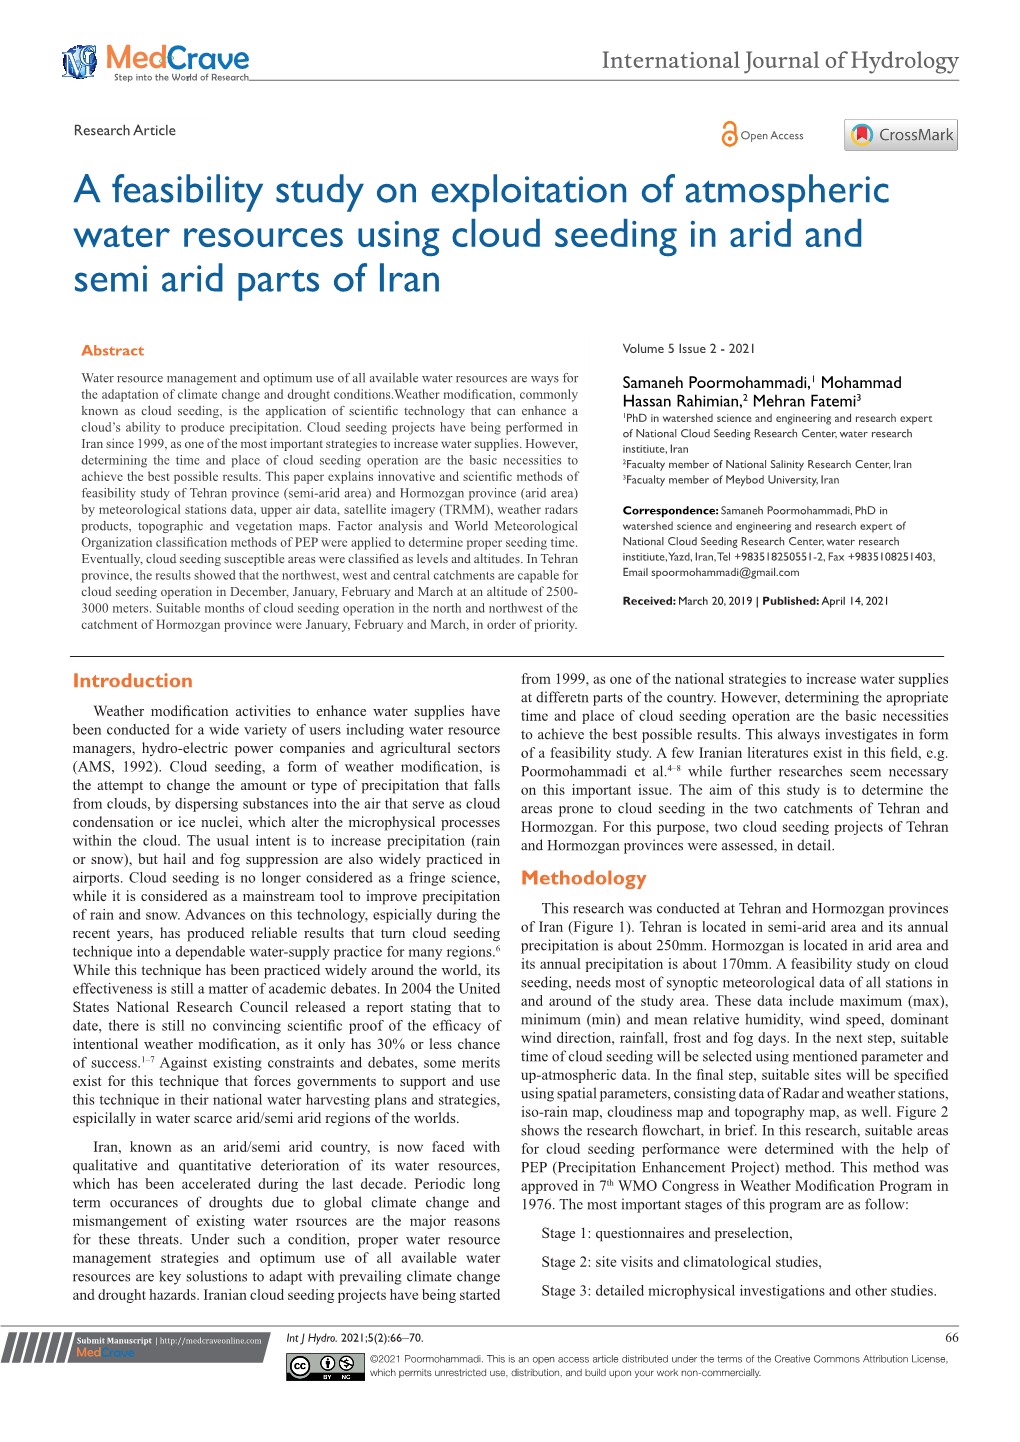 A Feasibility Study on Exploitation of Atmospheric Water Resources Using Cloud Seeding in Arid and Semi Arid Parts of Iran